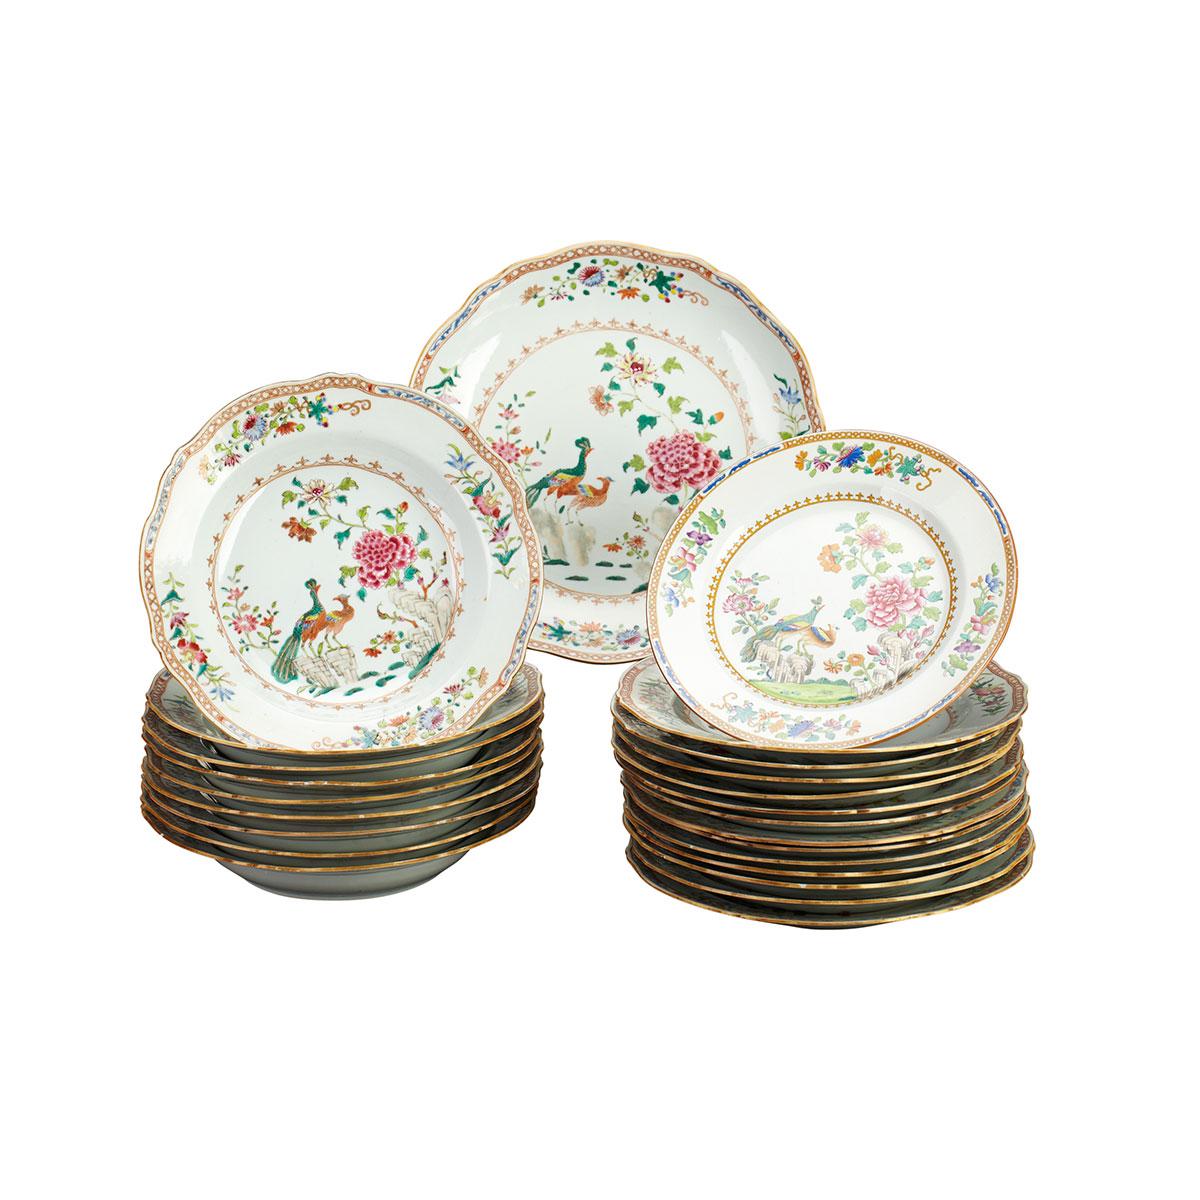 23 Export Famille Rose ‘Peacock’ Service Dishes, 18th Century